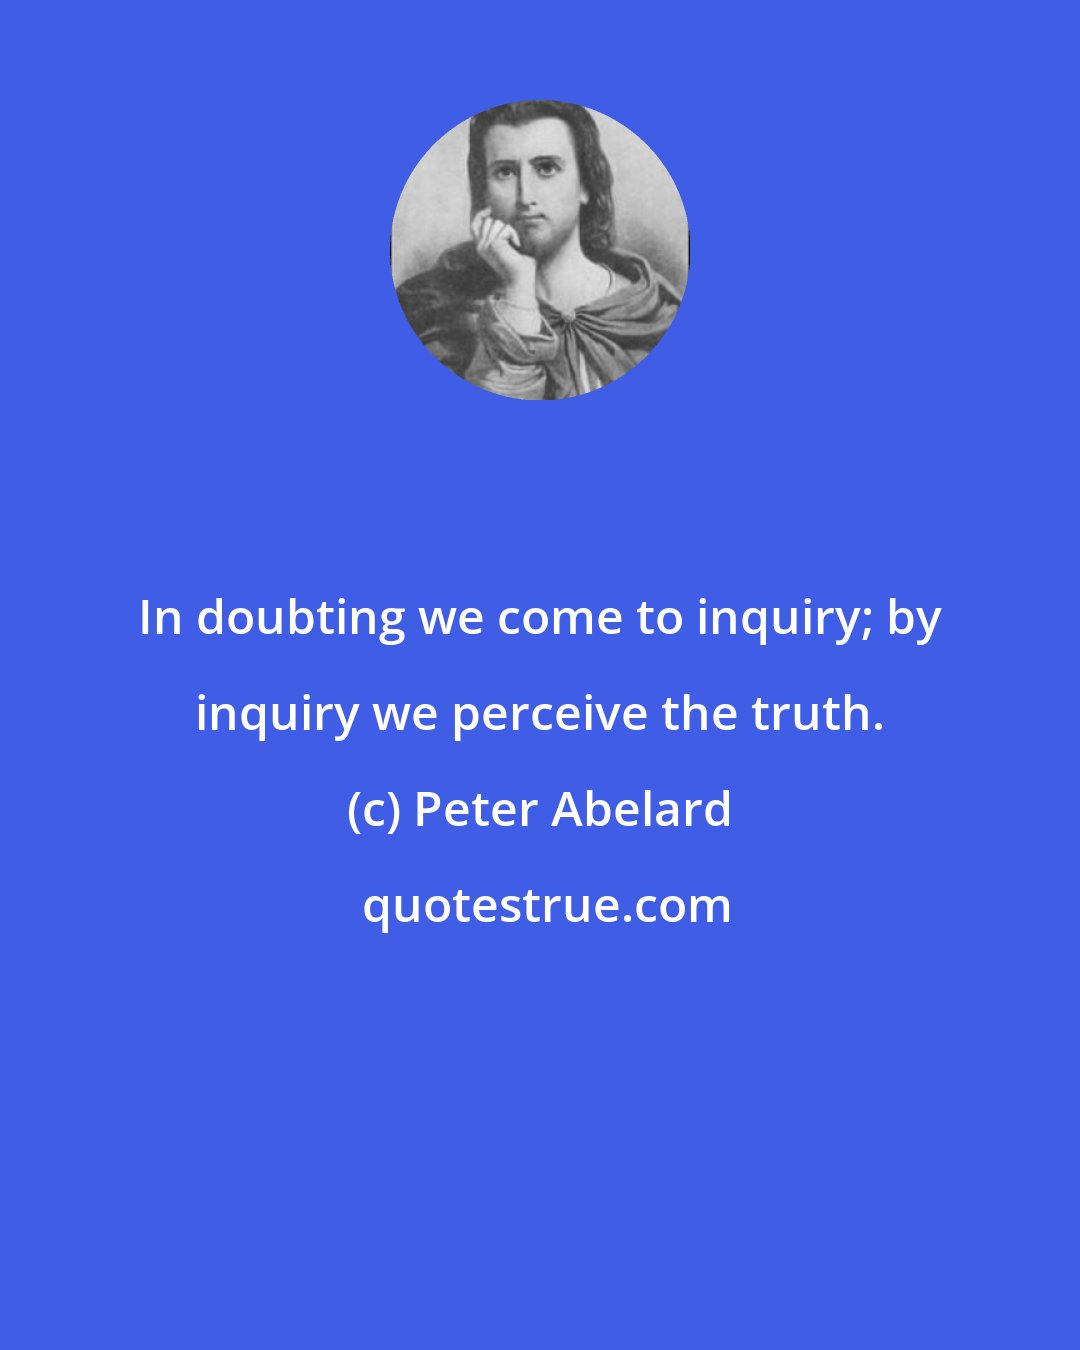 Peter Abelard: In doubting we come to inquiry; by inquiry we perceive the truth.